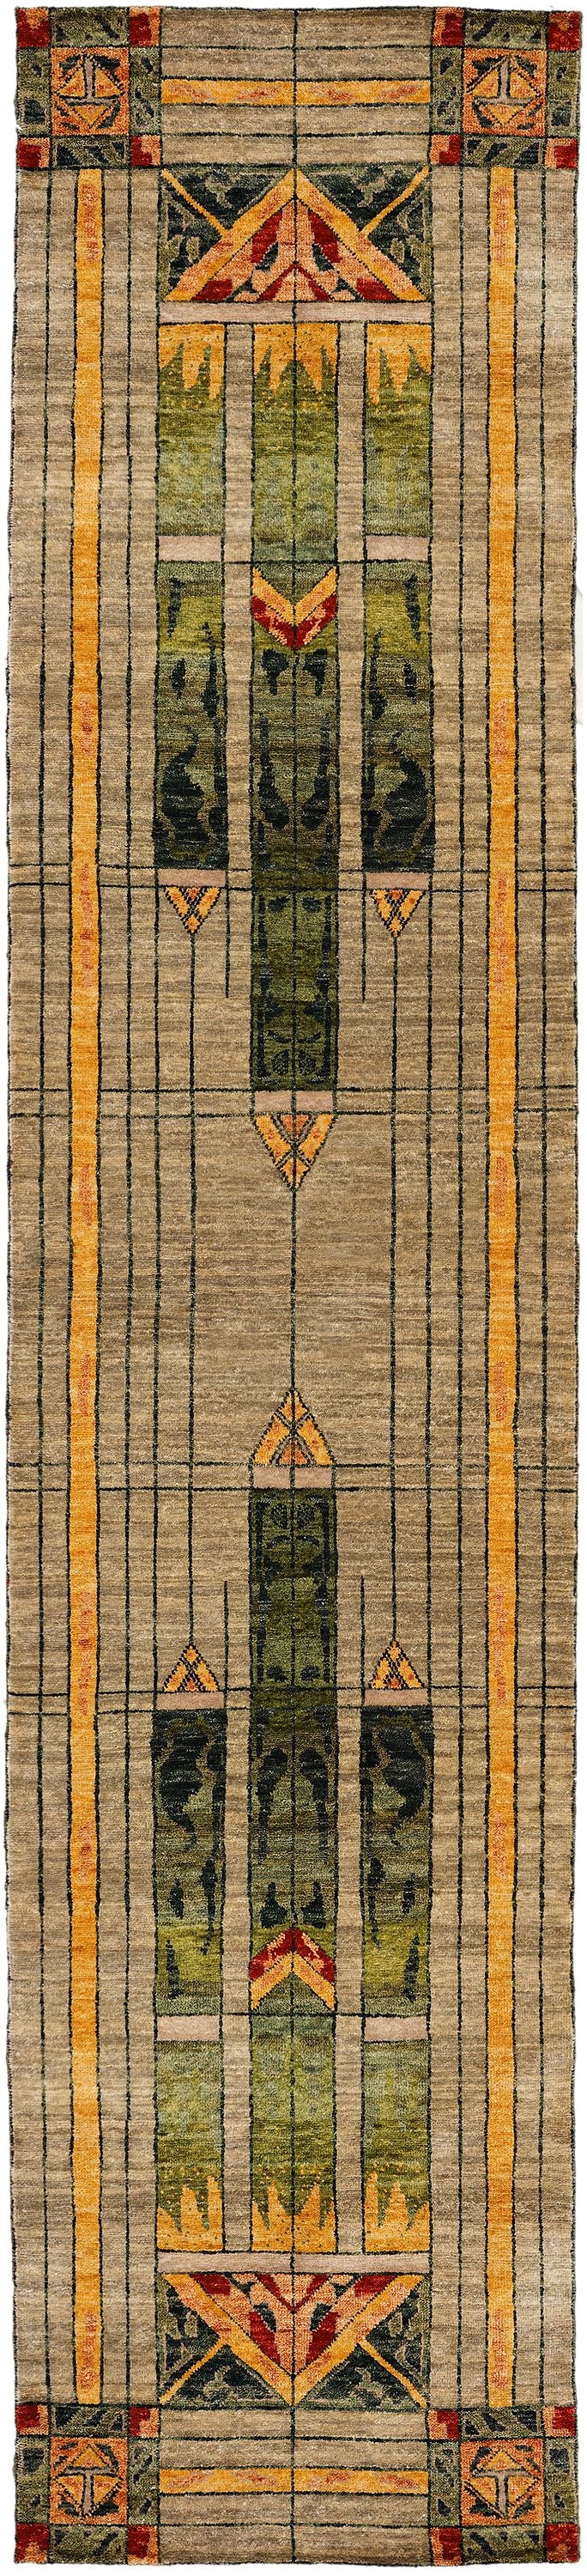 rugs with a stained glass design